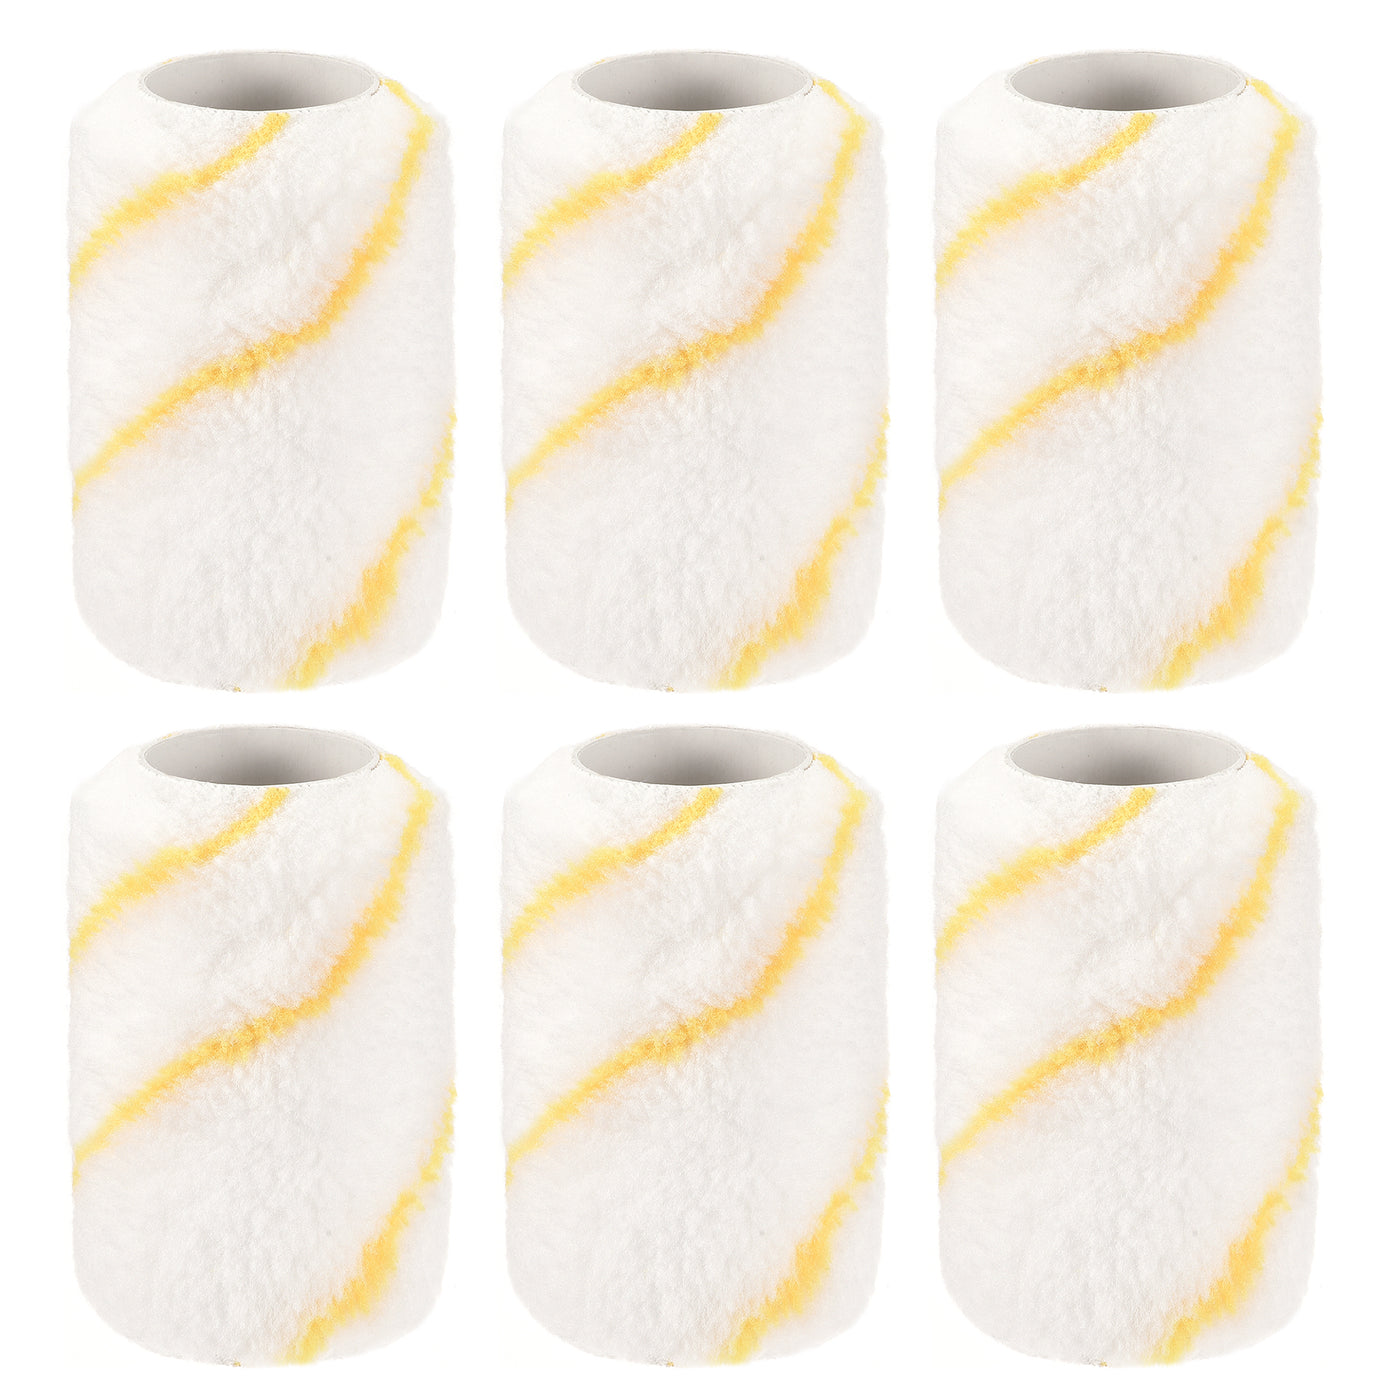 uxcell Uxcell Paint Roller Cover 4 Inch x 1/2" Nap Mini Microfiber Brush for Household Wall Painting Treatment 6Pcs